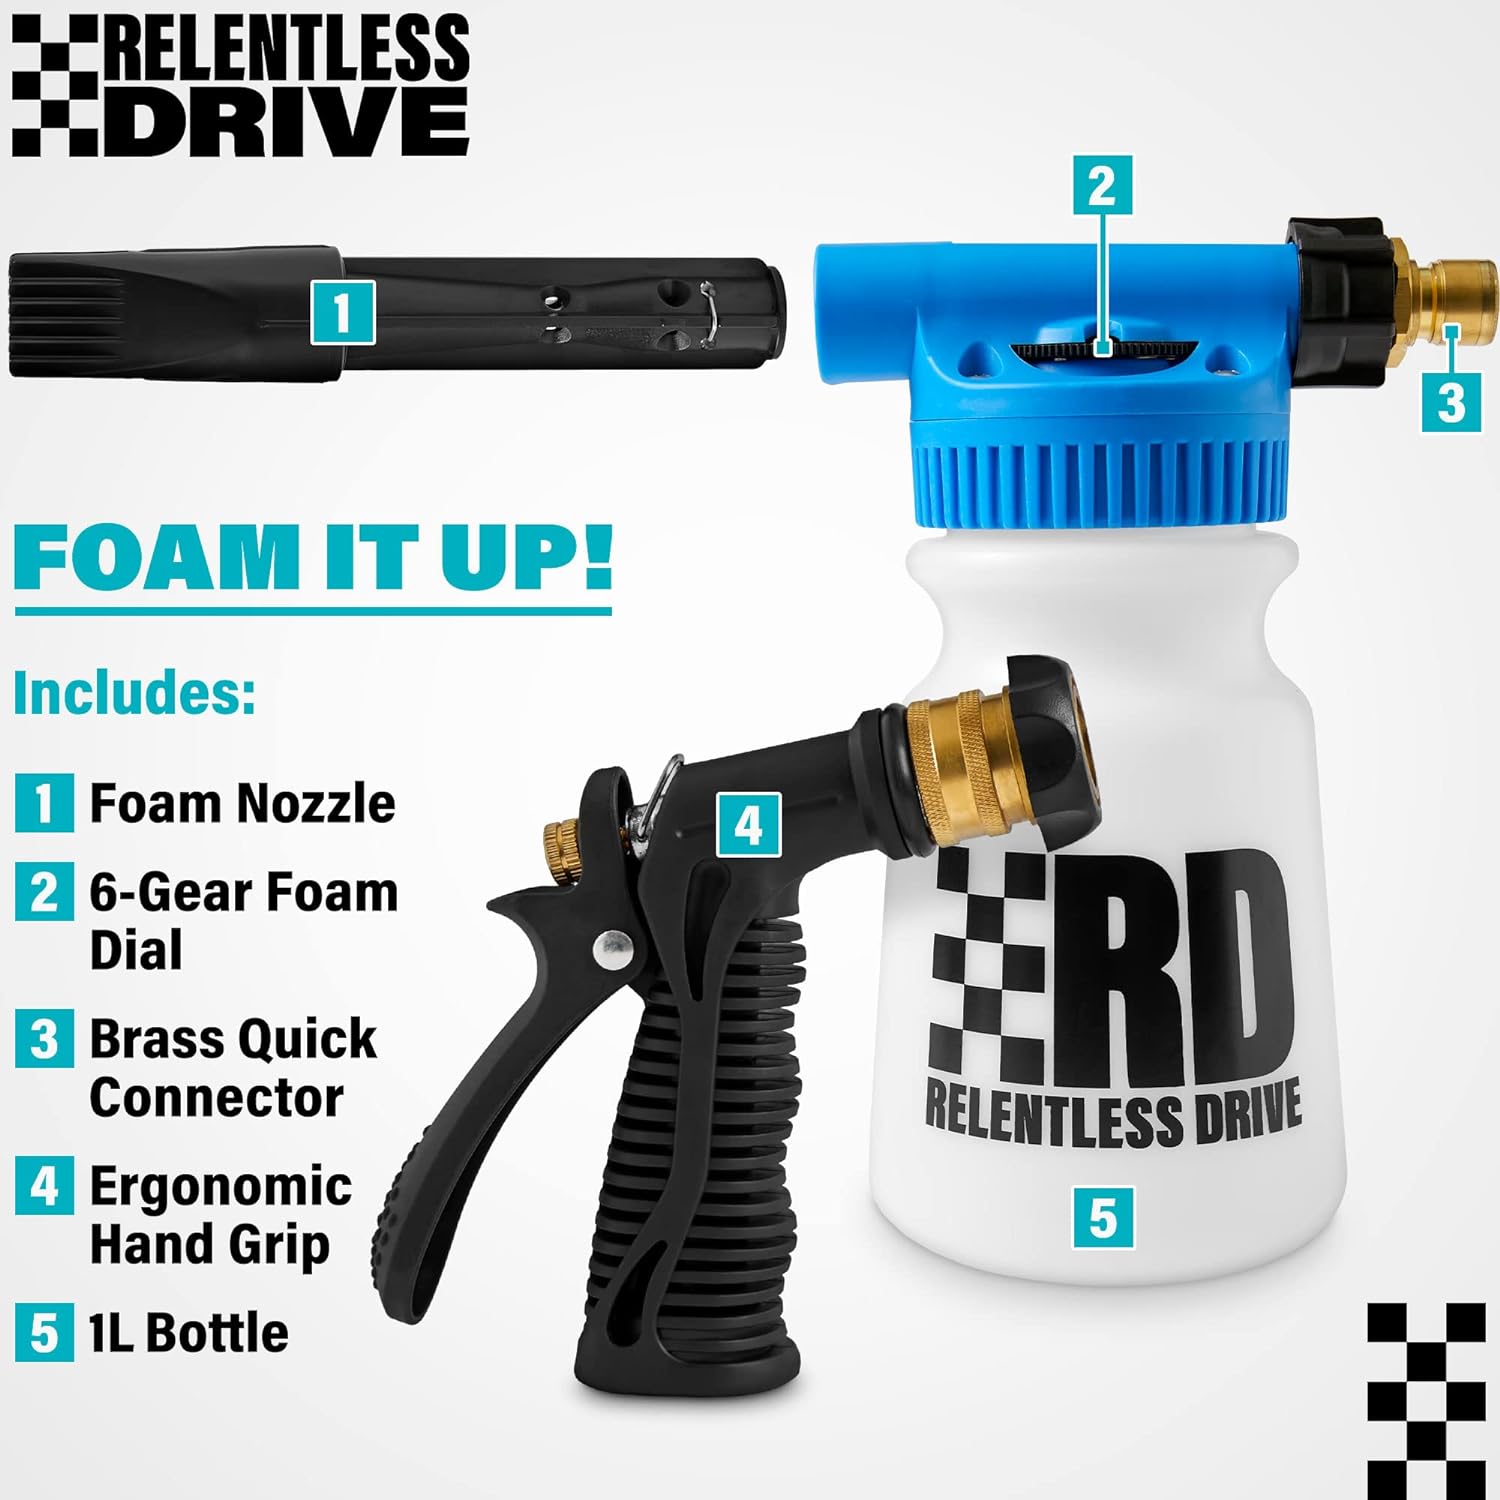 Relentless Drive Premium Foam Cannon for Garden Hose (Connects to Any Garden Hose) - Leak Free, Easy to Use Foam Gun has 6 Spray Patterns for Ma